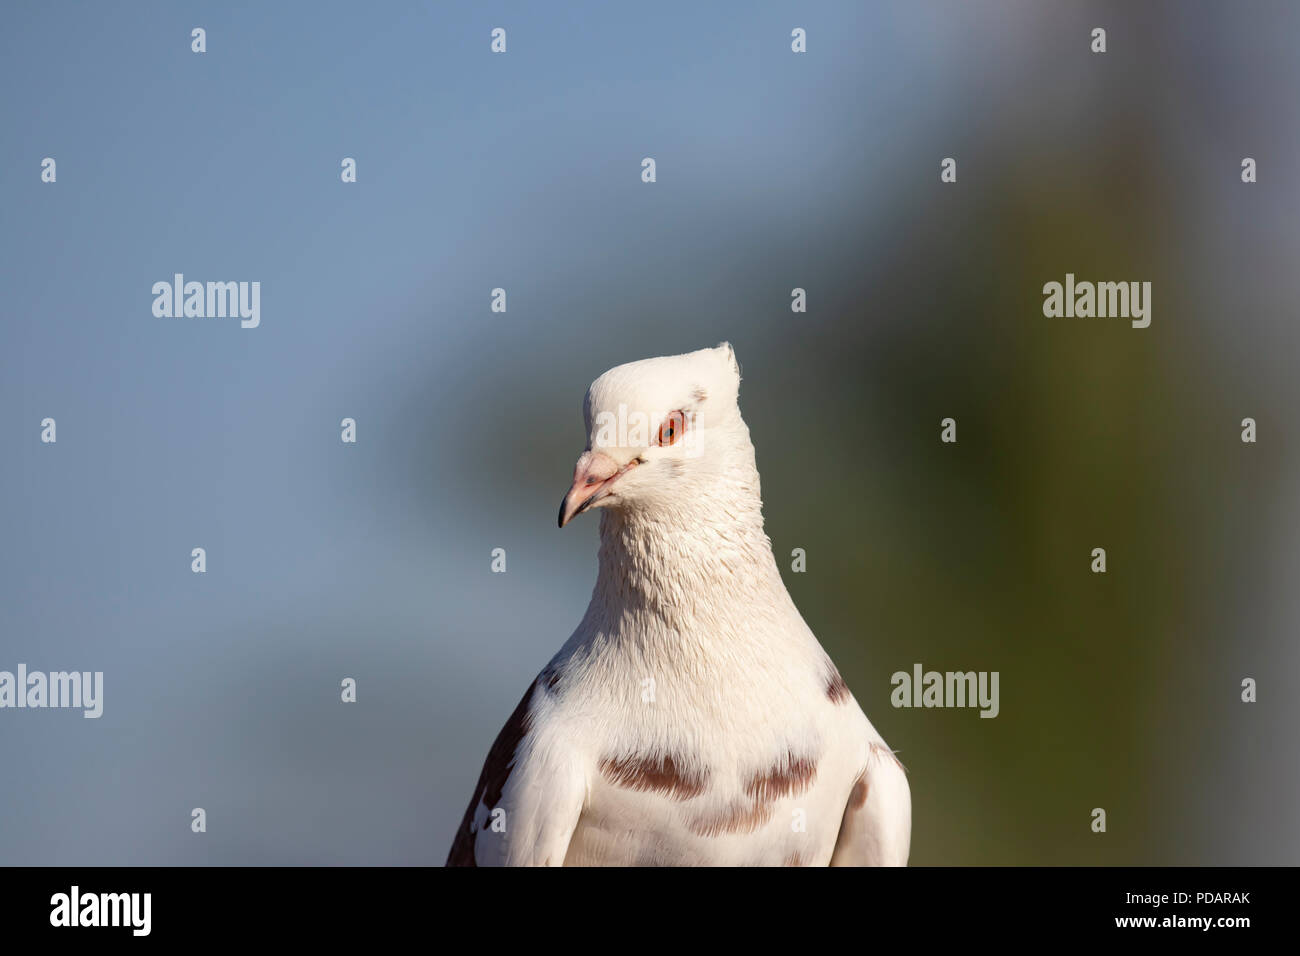 White head pigeon with head crest Stock Photo